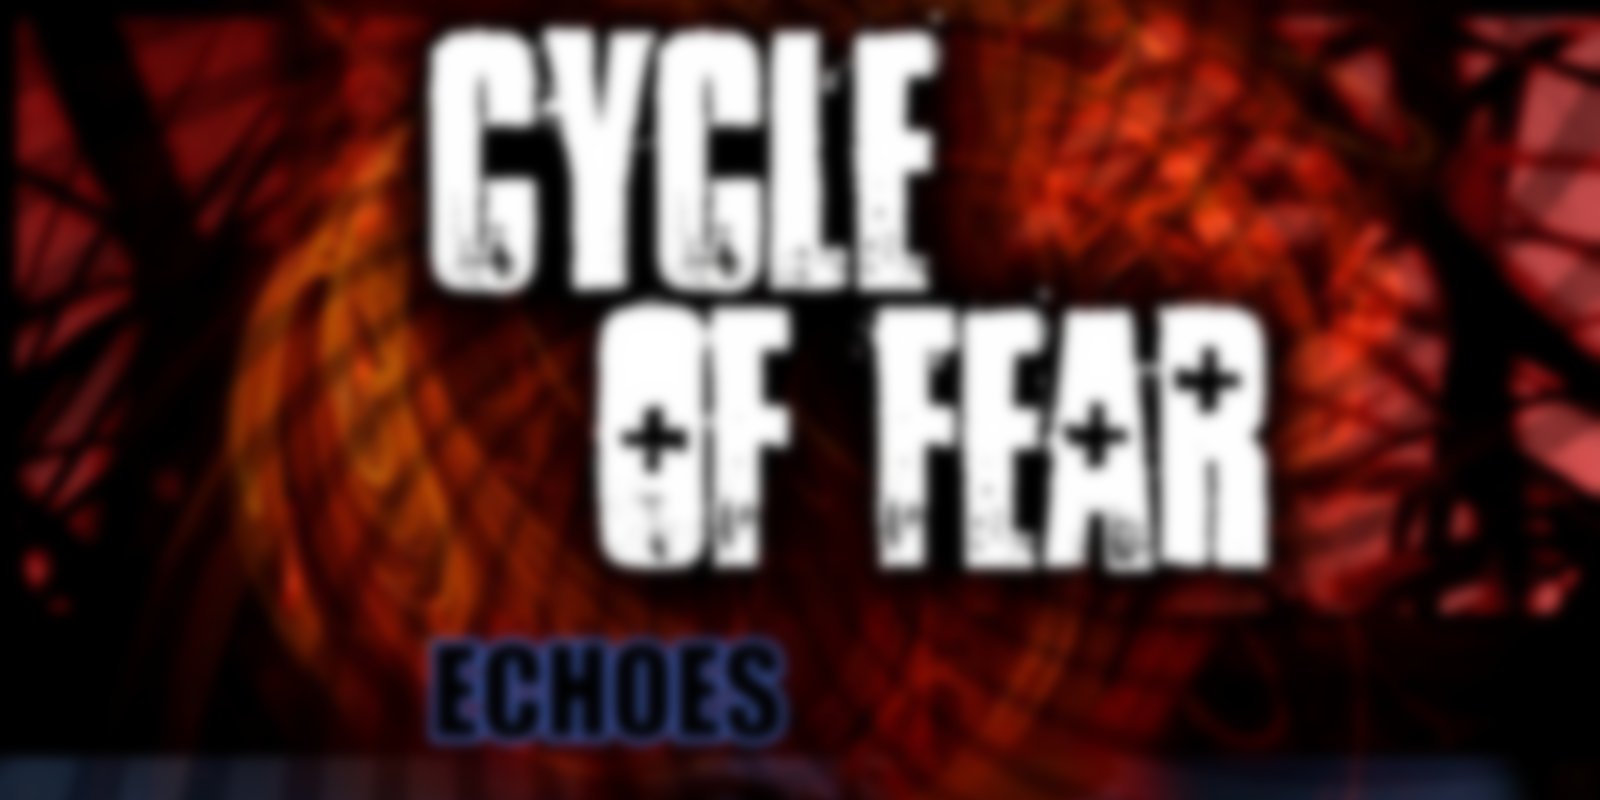 Cycle of Fear 3